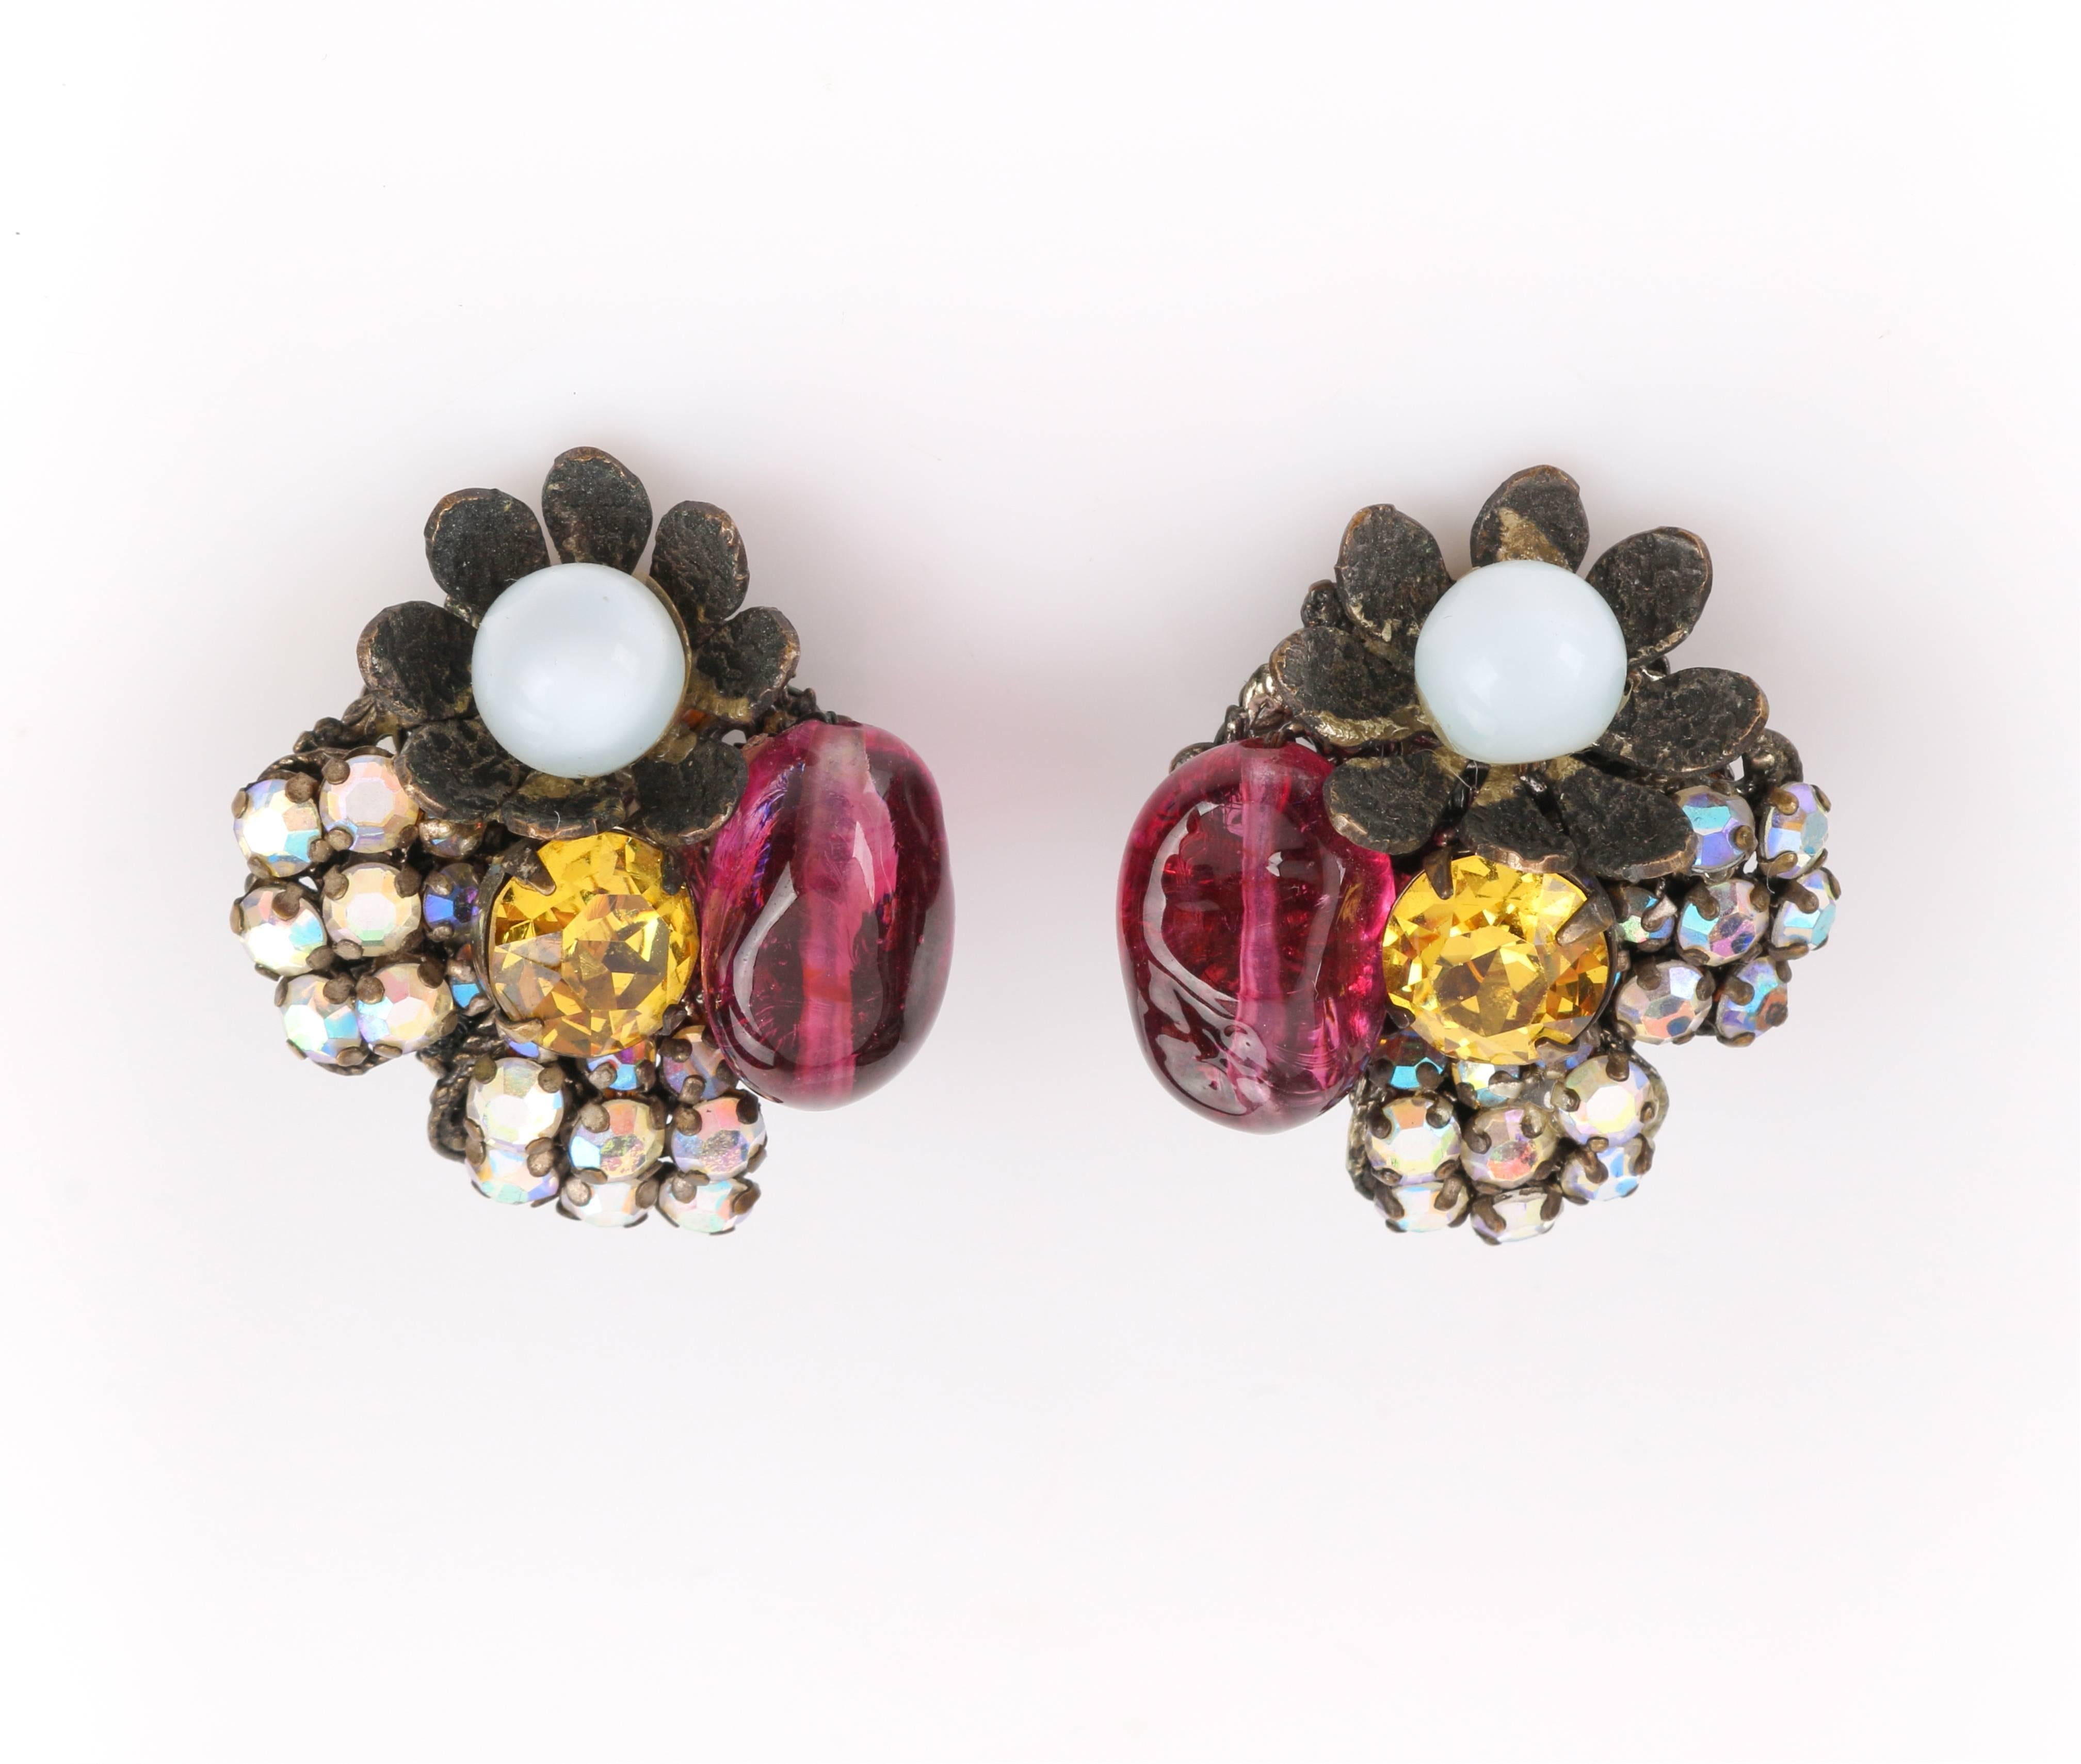 Vintage Miriam Haskell c.1950's glass bead and crystal rhinestone clip-on cluster earrings. Designed by Frank Hess. Brass-toned curved petal flower with white glass spherical bead center, two aurora borealis crystal rhinestone clusters, and pink